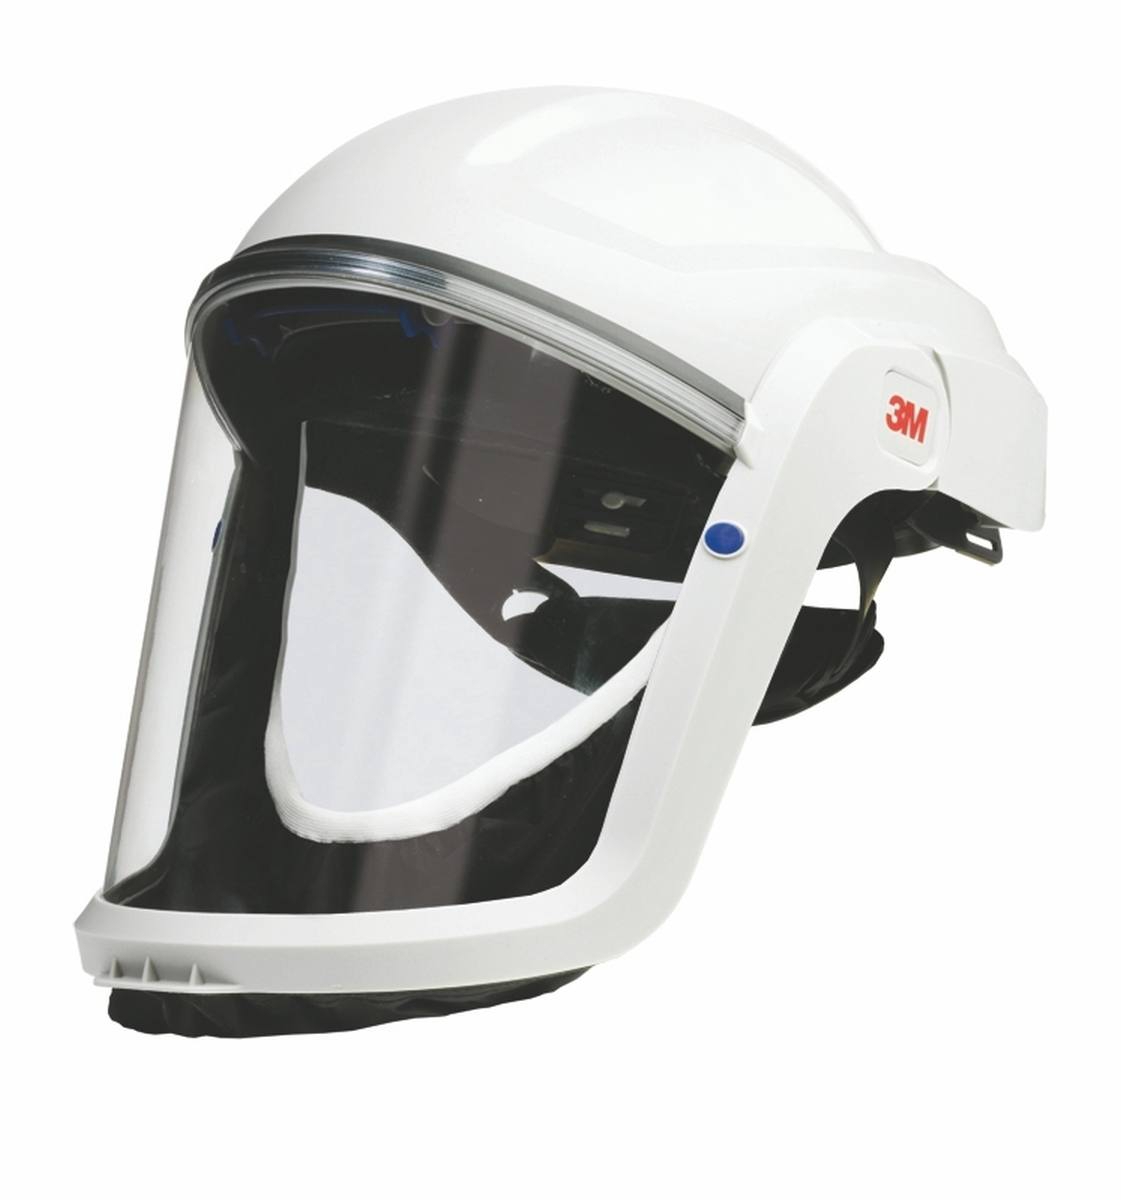 3M Versaflo Safety helmet M206 with comfort face seal and polycarbonate visor, clear